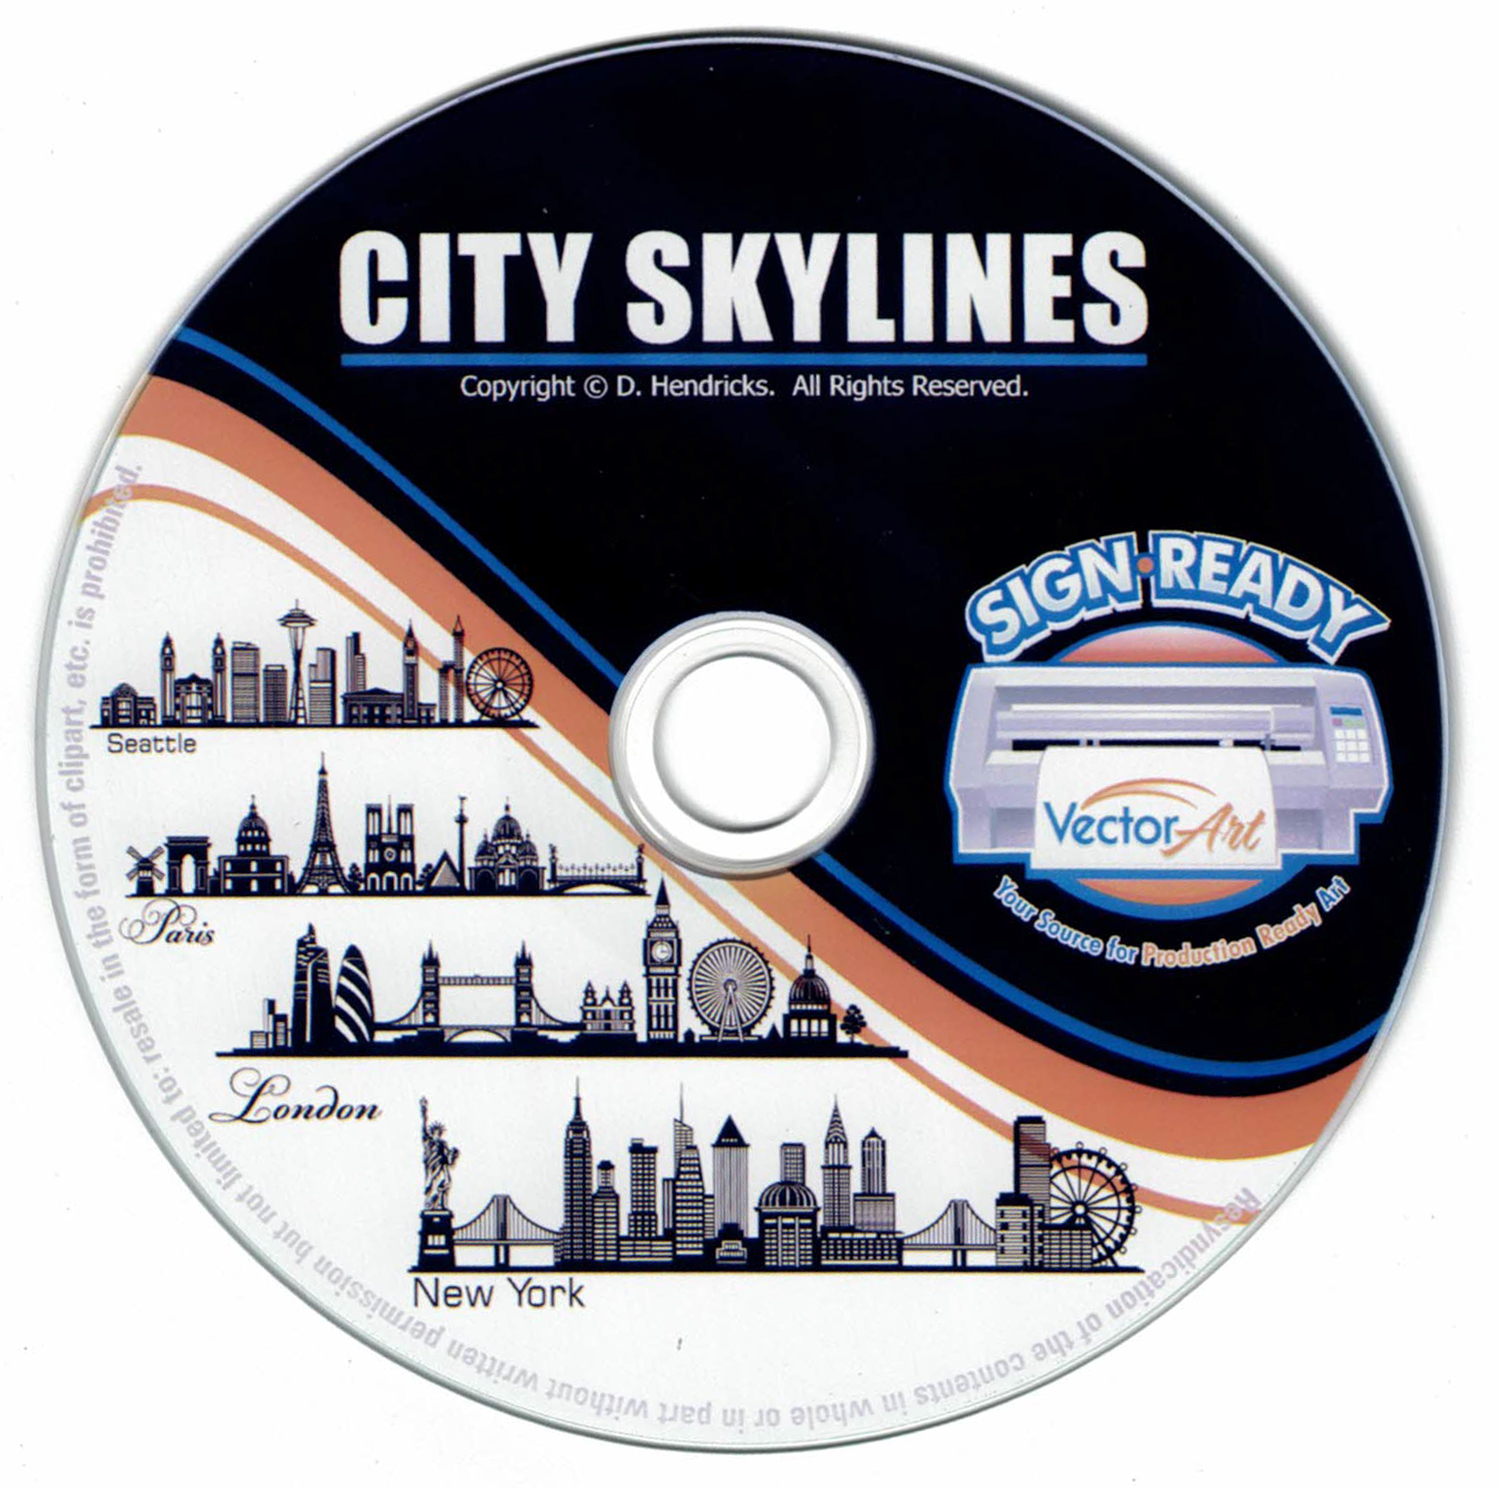 City Skylines - Cityscapes - Big City Outlines ClipArt